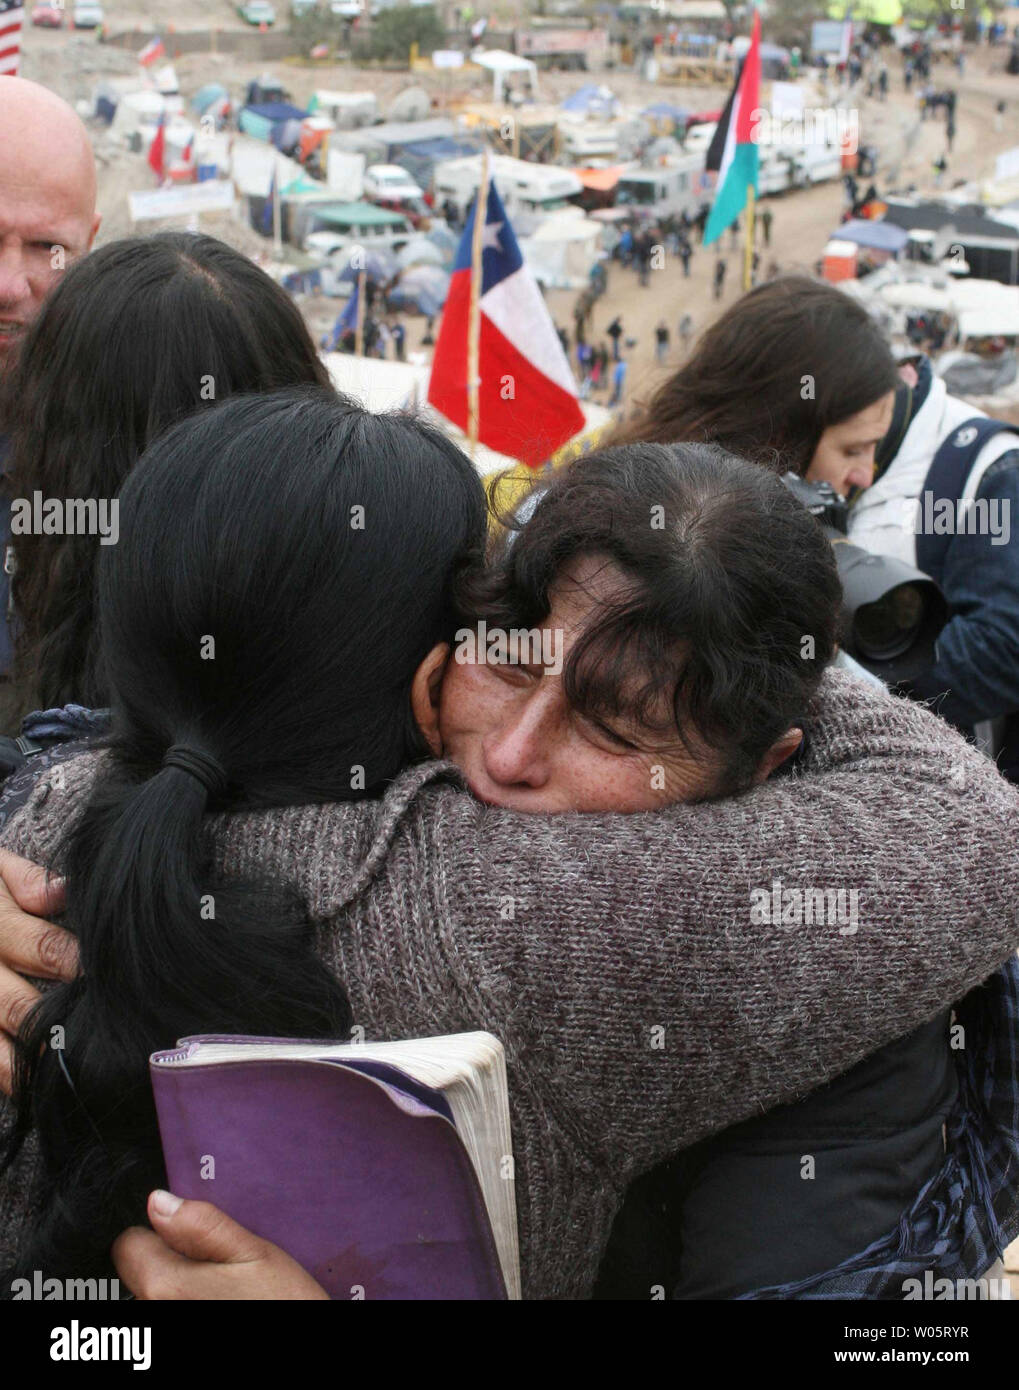 Relatives hug as preparations continue to rescue the 33 trapped miners at San Jose Mine, Chile on October 11, 2010.   If all goes well, officials say the first miners will be brought up in a few days via a 20-minute ride in a rescue capsule more than 2,000 feet below the surface.   The miners have been trapped for more than two months.   UPI/Sebastian Padilla Stock Photo